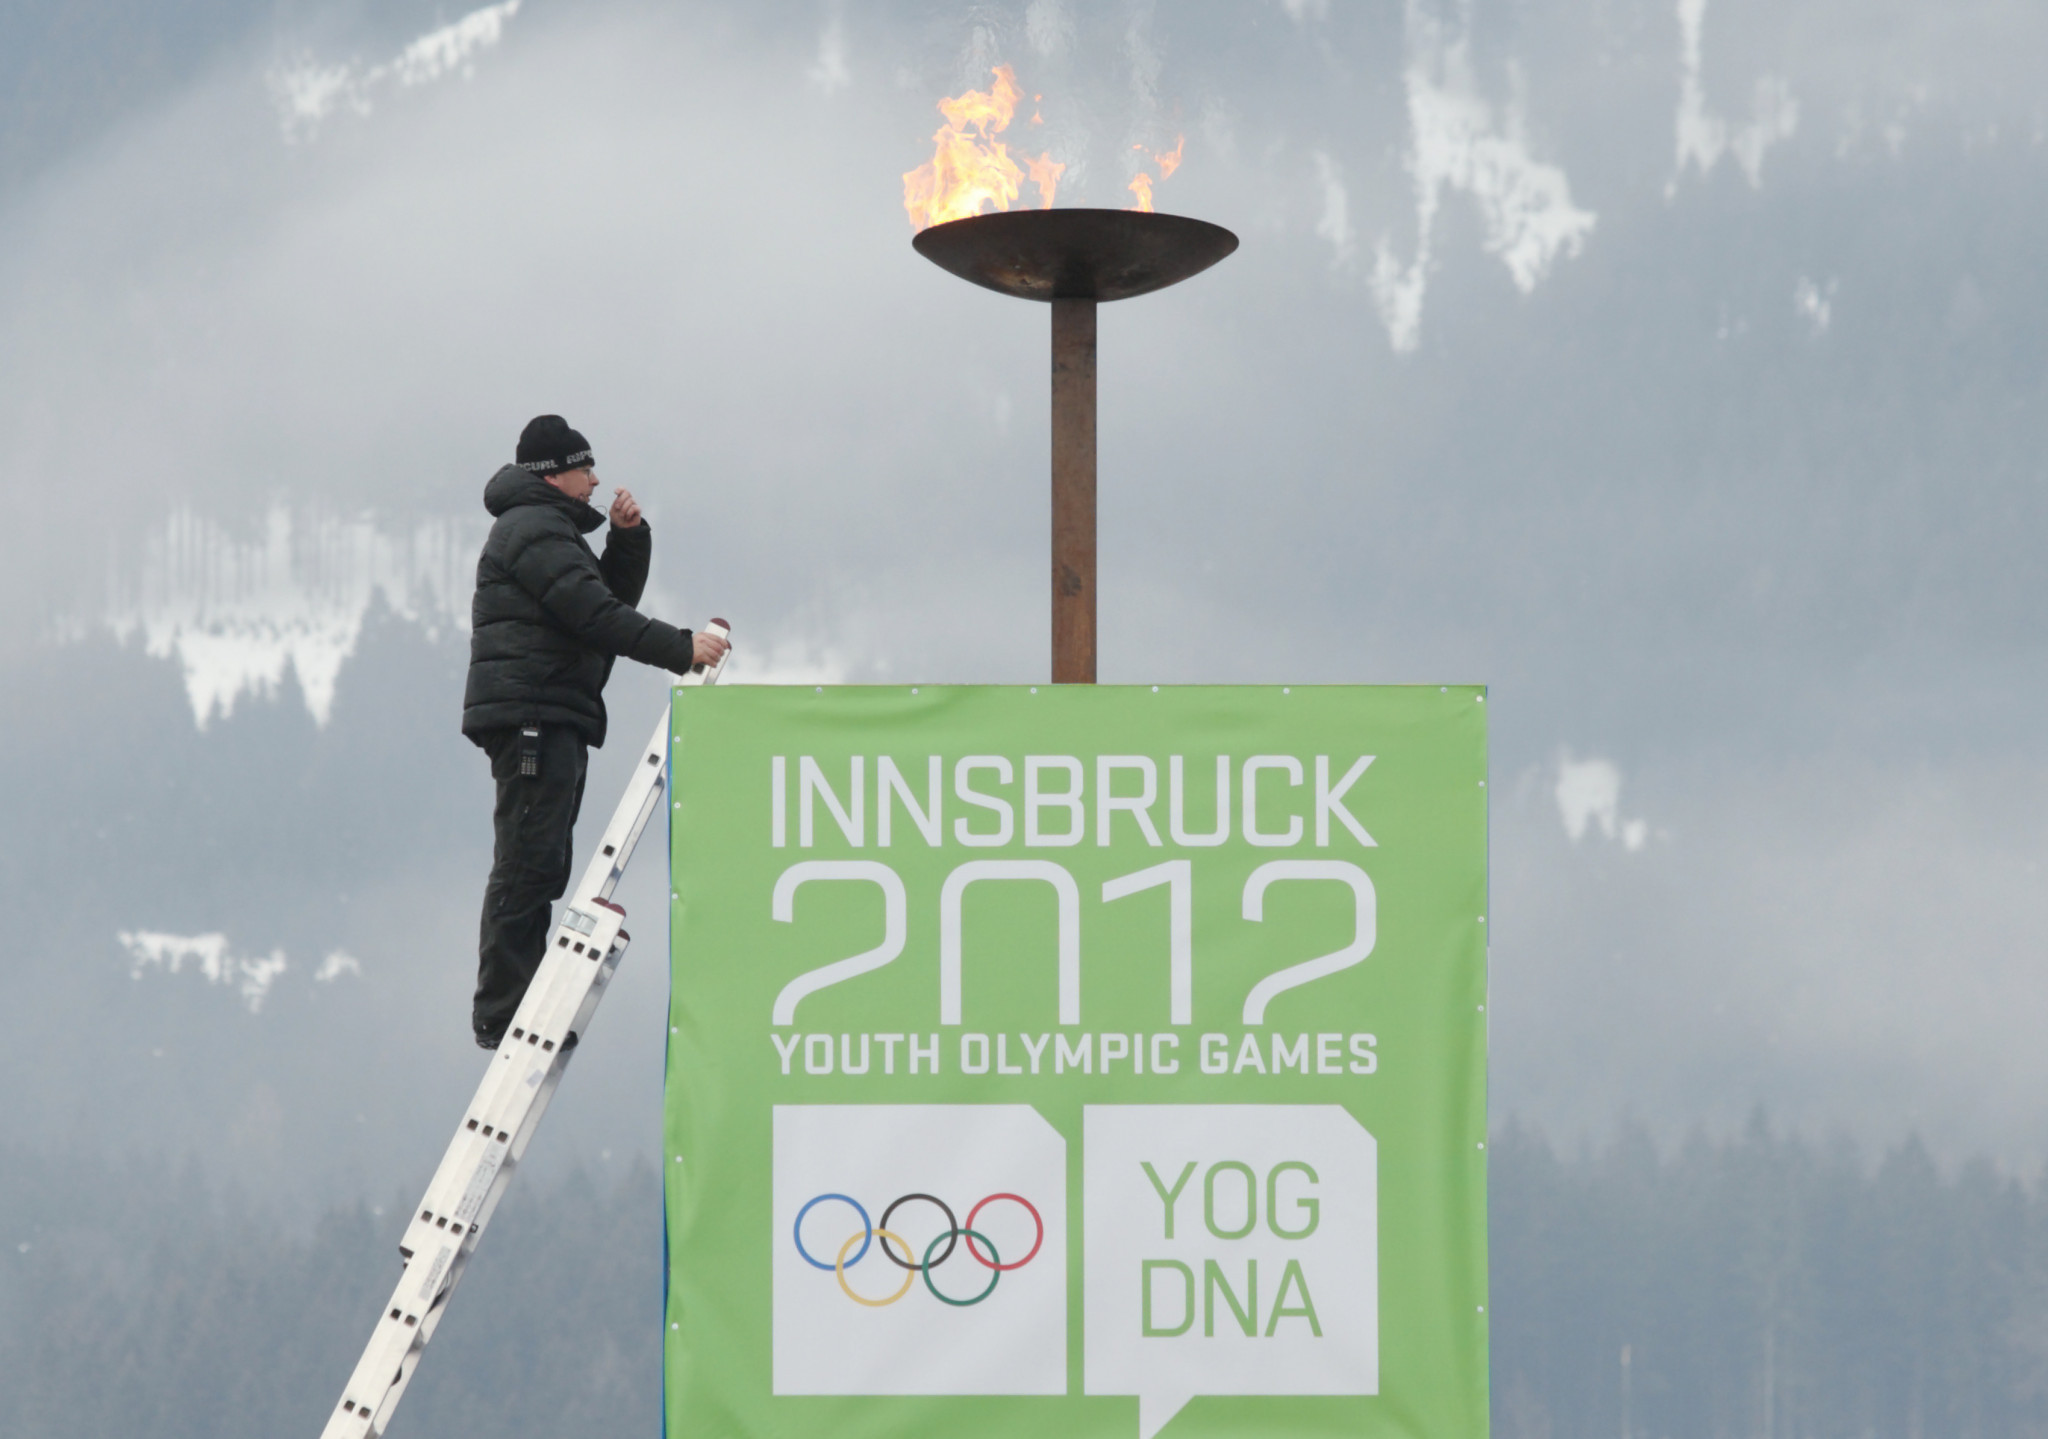 The flame burns at the first Winter Youth Olympic Games in Innsbruck ©Getty Images